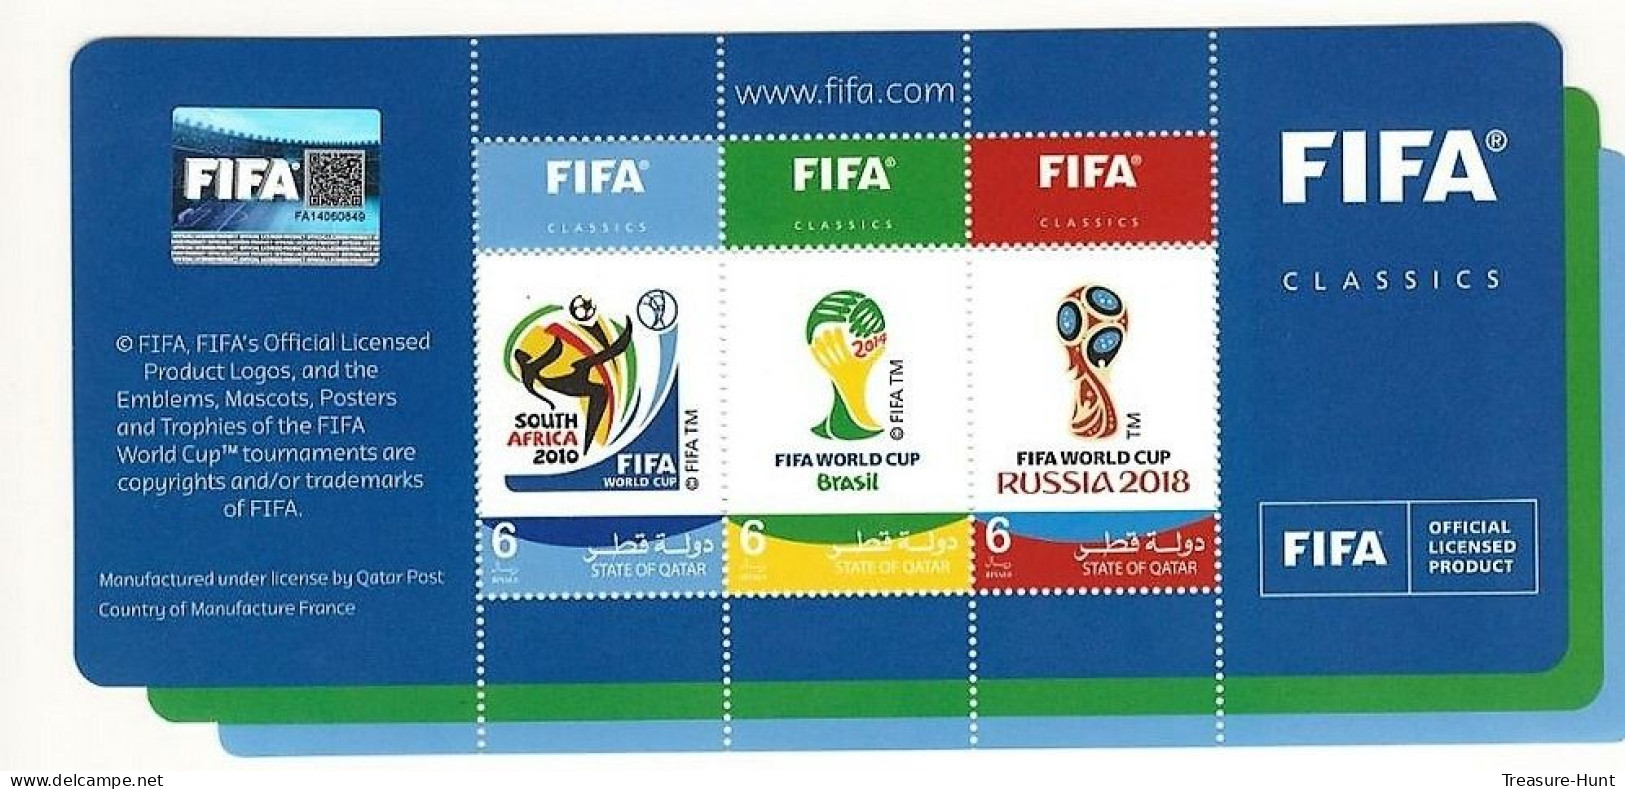 Hologram Holograms QR Code - FIFA Classics Stamp Sheet Qatar - Soccer World Cup In South Africa Russia & Brazil - Hologramme